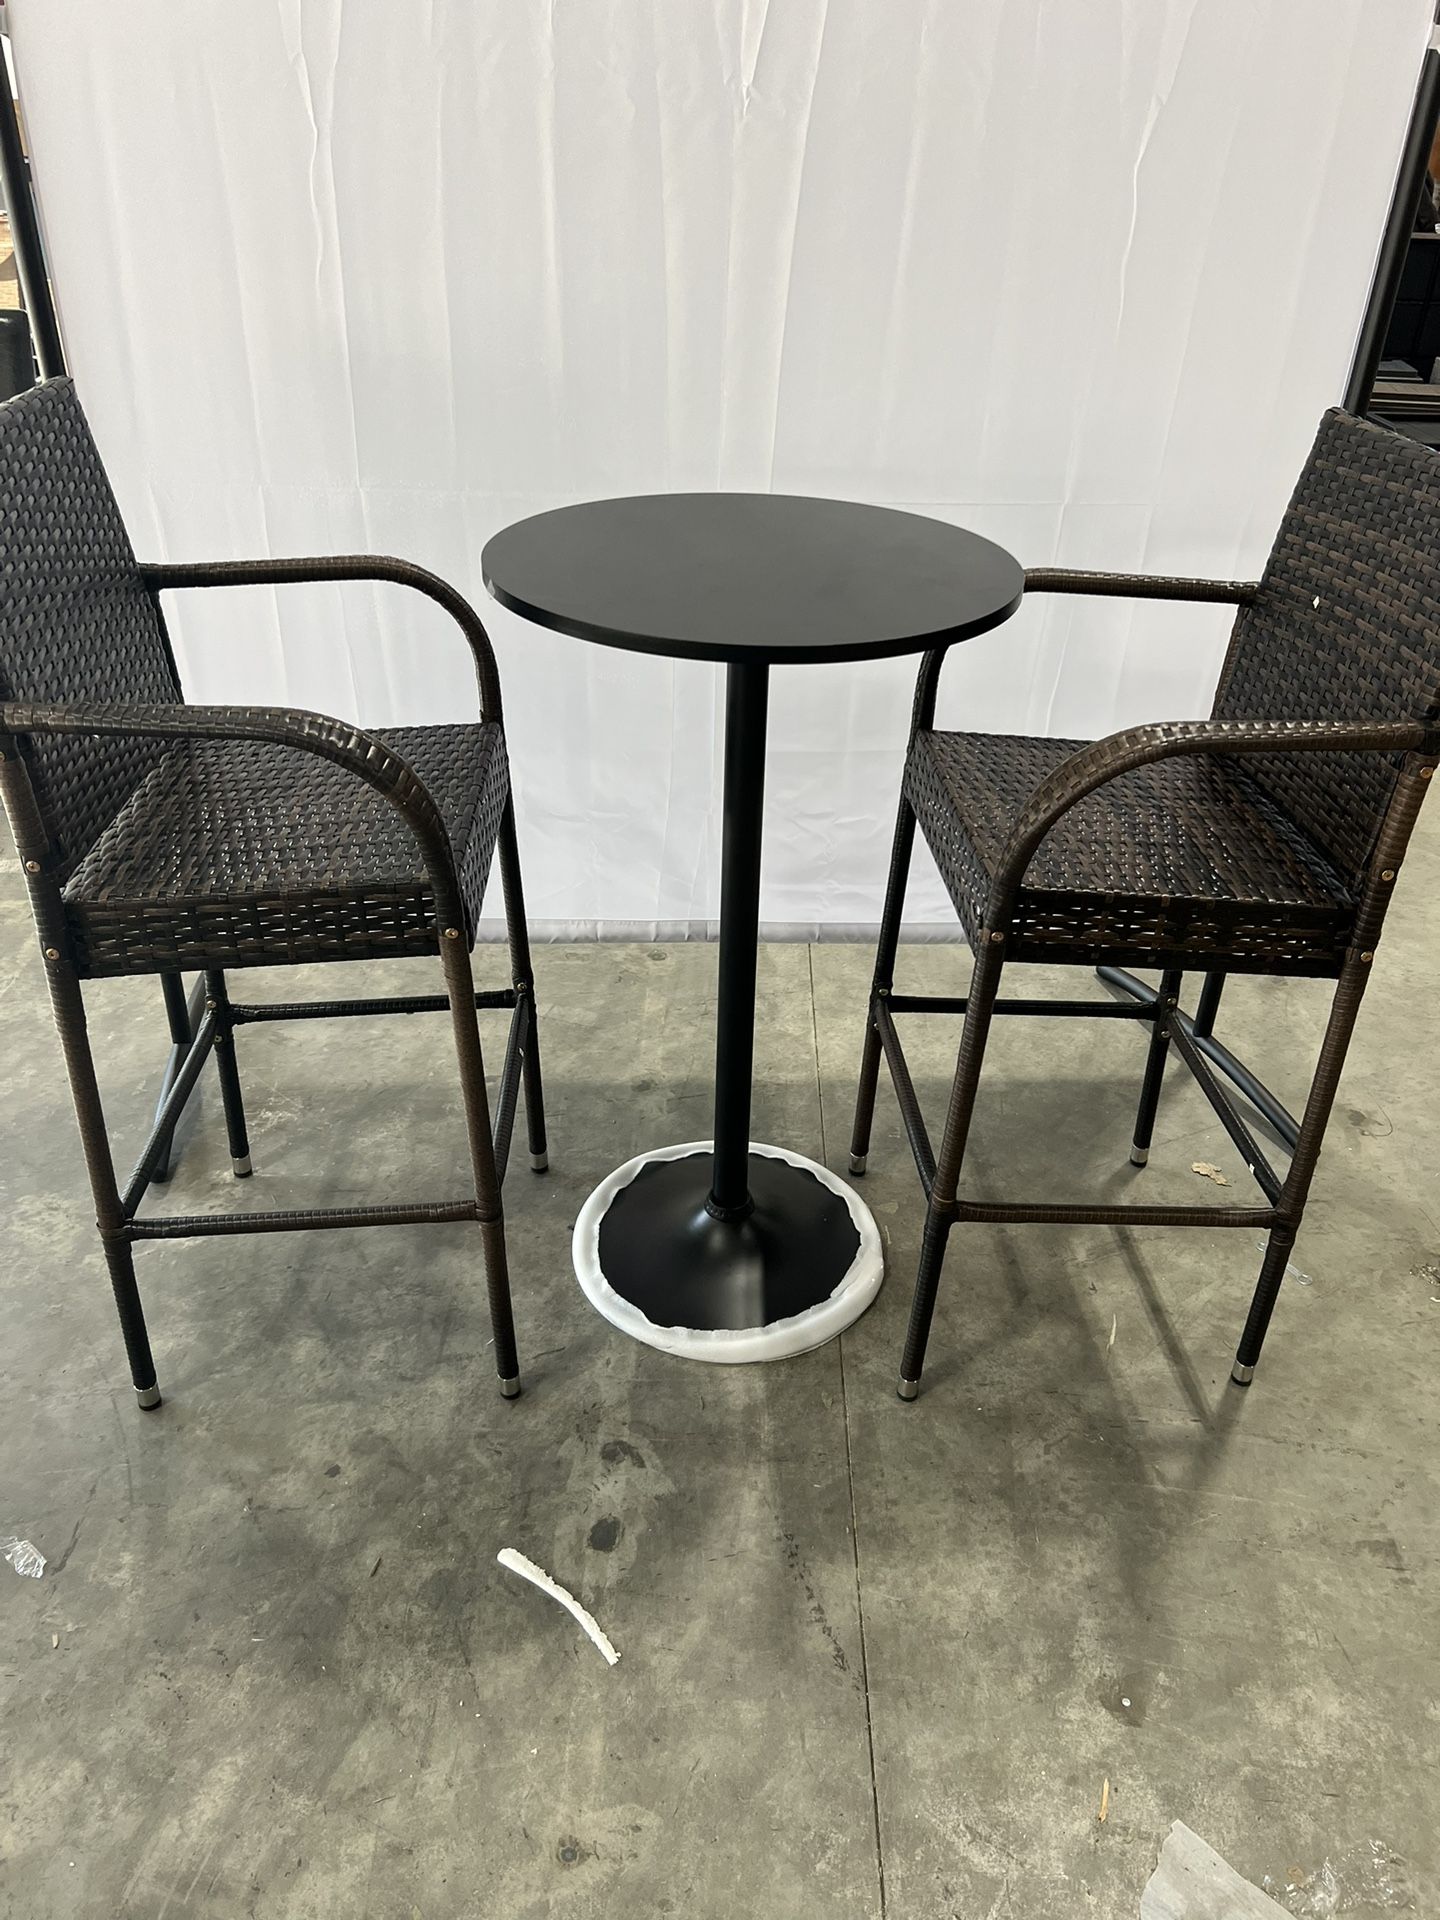 brand new Outdoor Bar Stools Set of 3， Patio Stools, Tall Patio Chairs and Table Wicker Rattan Outside Barstool with Back and Armrest (Brown，$200